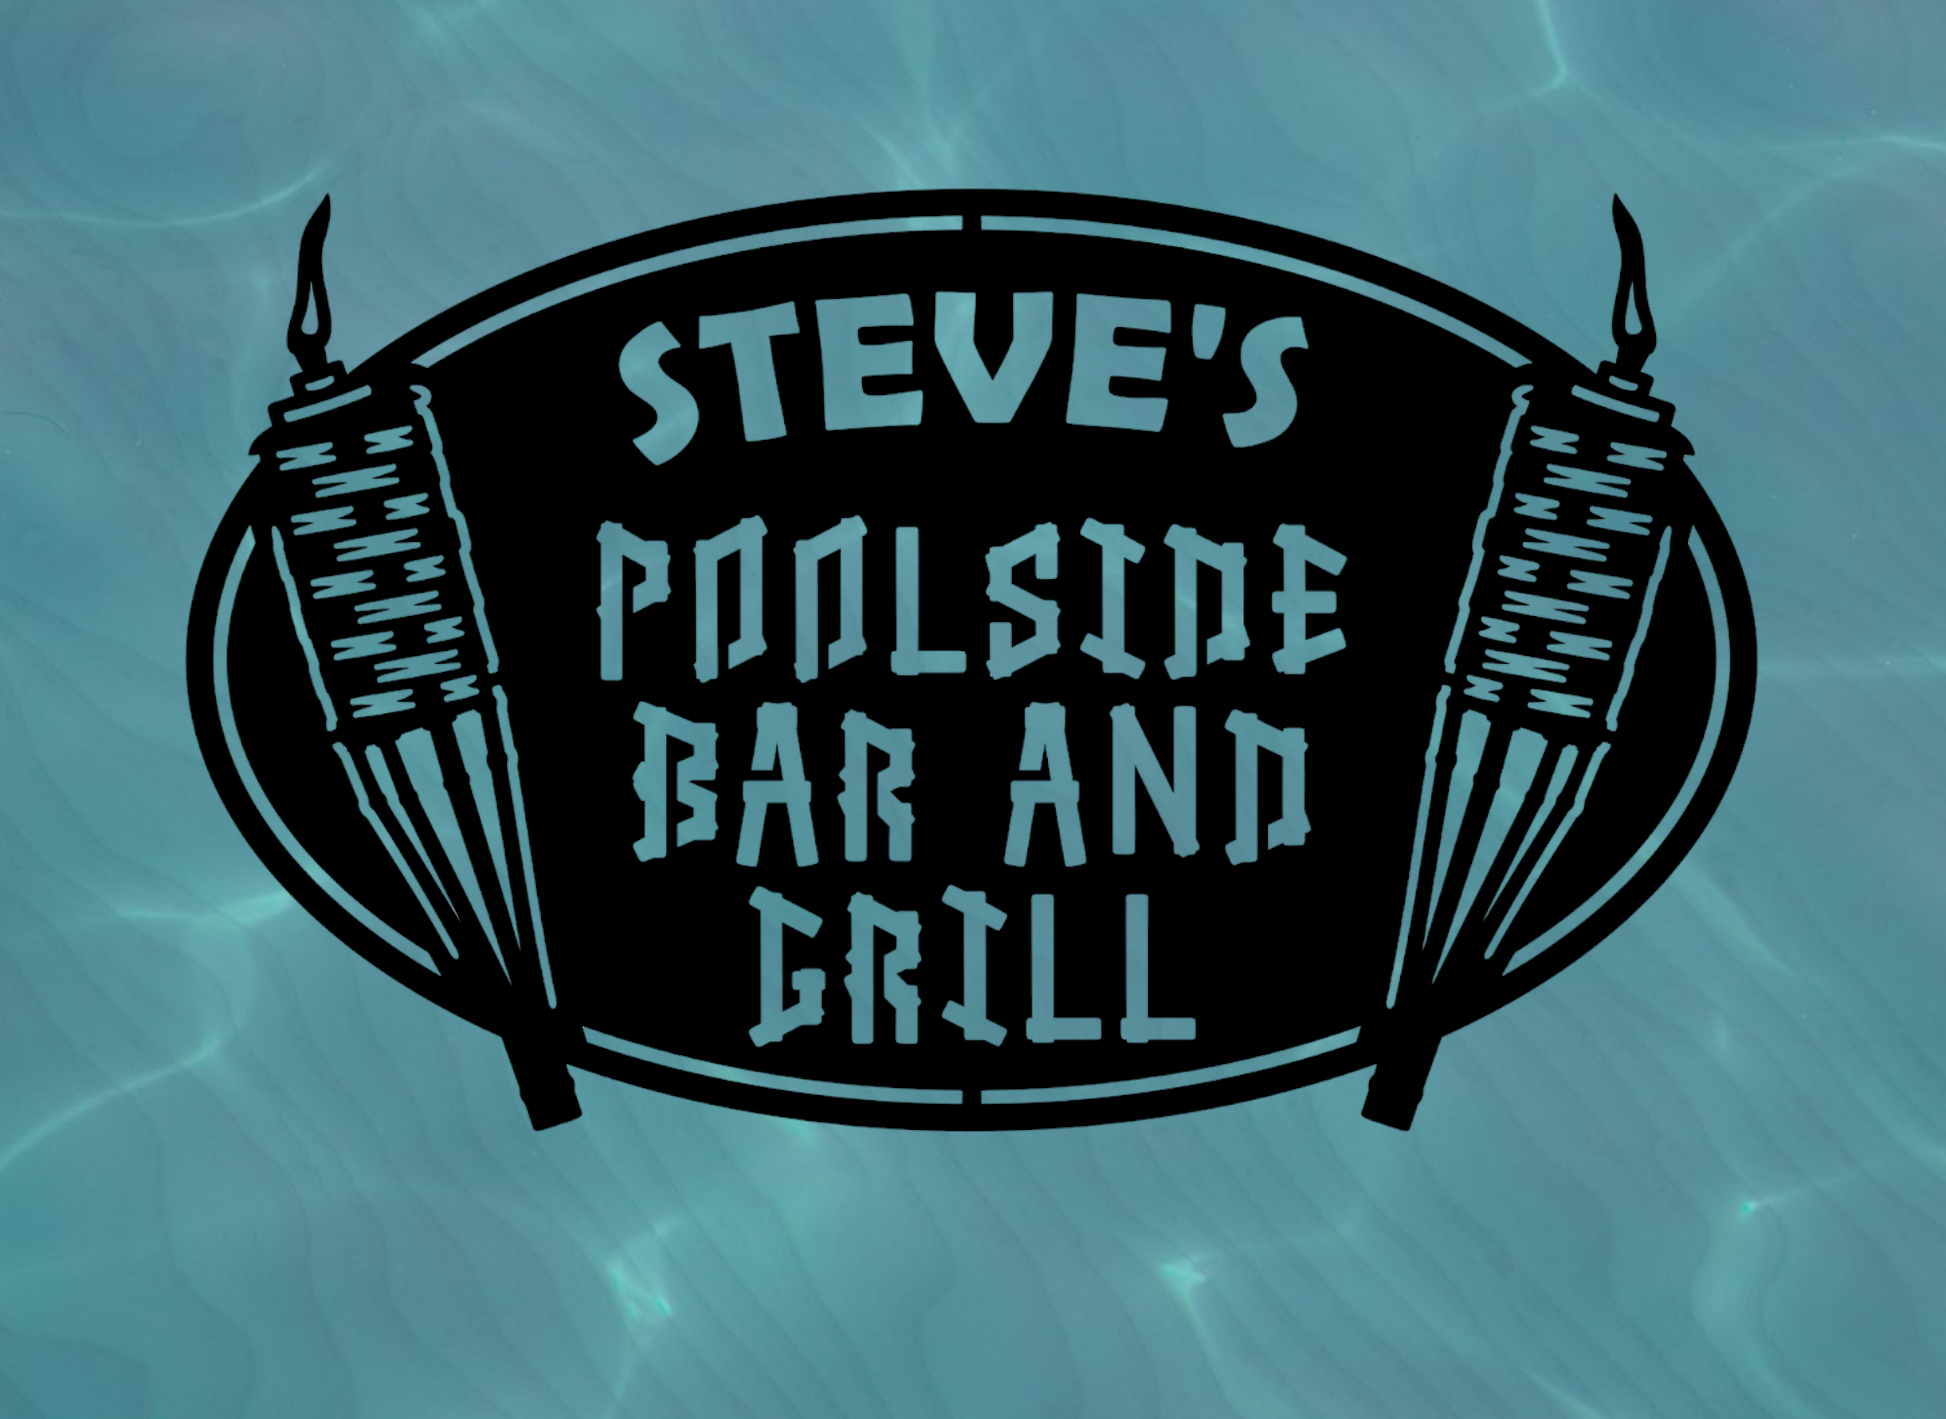 poolside bar & grill custom personalized metal sign